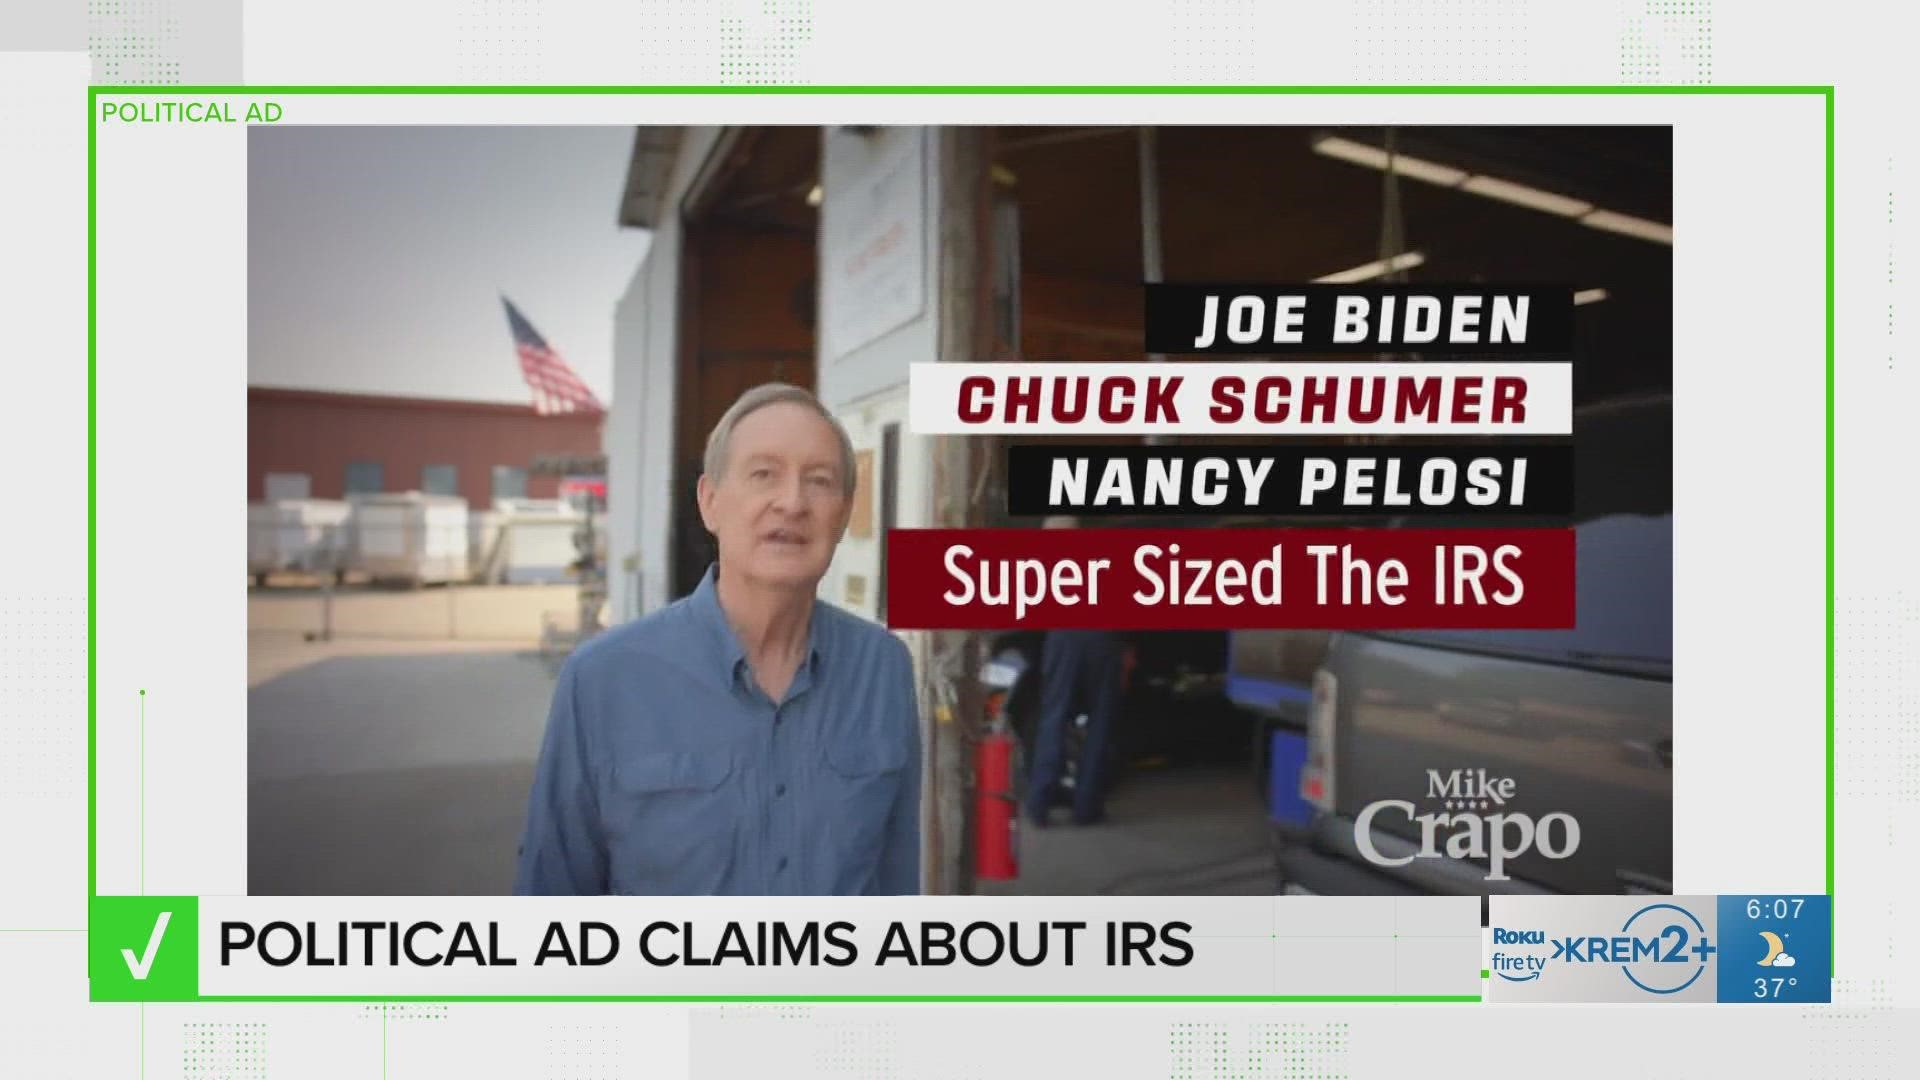 Idaho Sen. Mike Crapo claims in a political ad that democratic leaders are creating an IRS larger than the Pentagon. Our Verify team finds the claim lacks context.